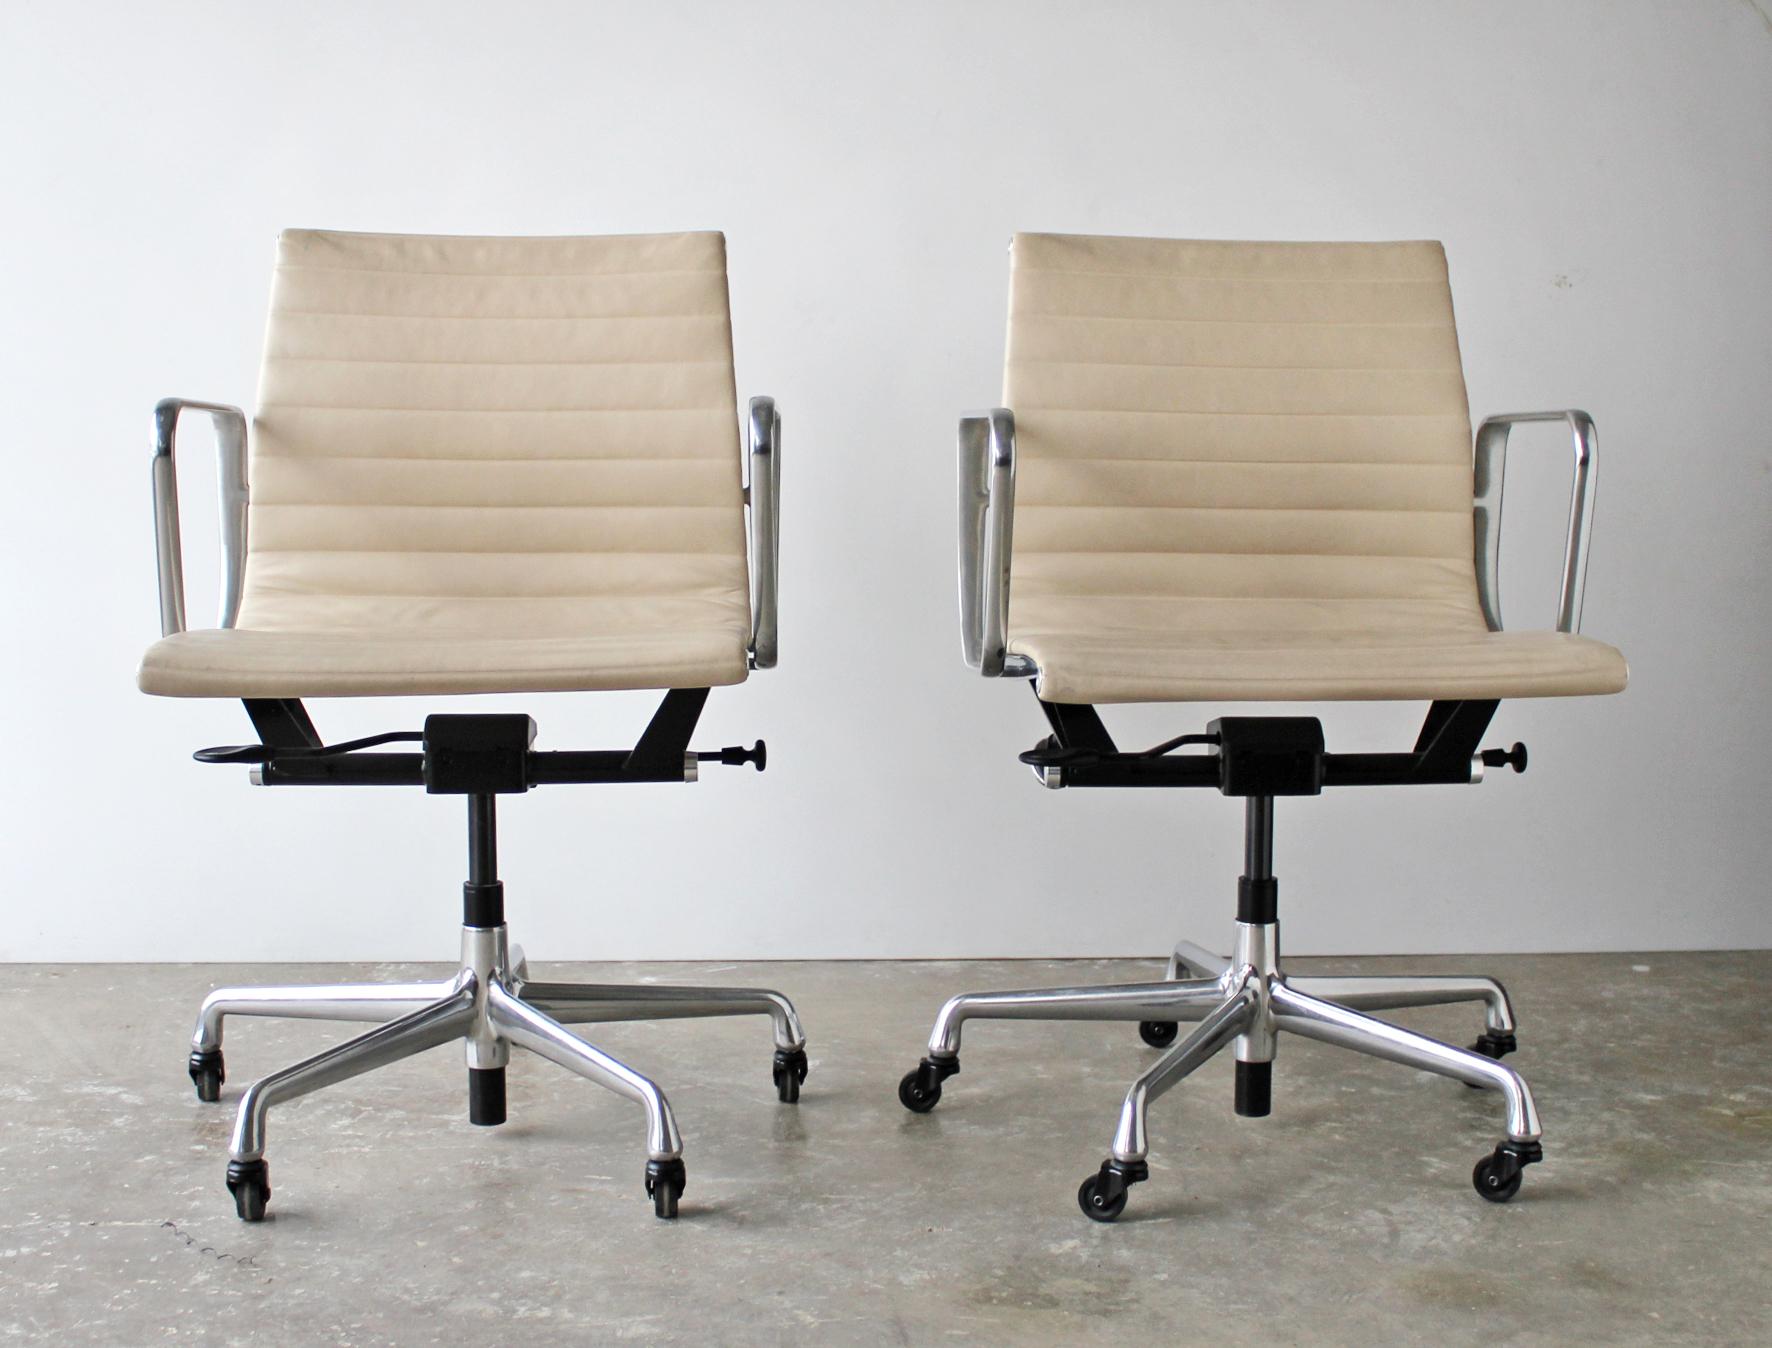 American Eames Chairs for Herman Miller Aluminum Group Management Series, 10 Available